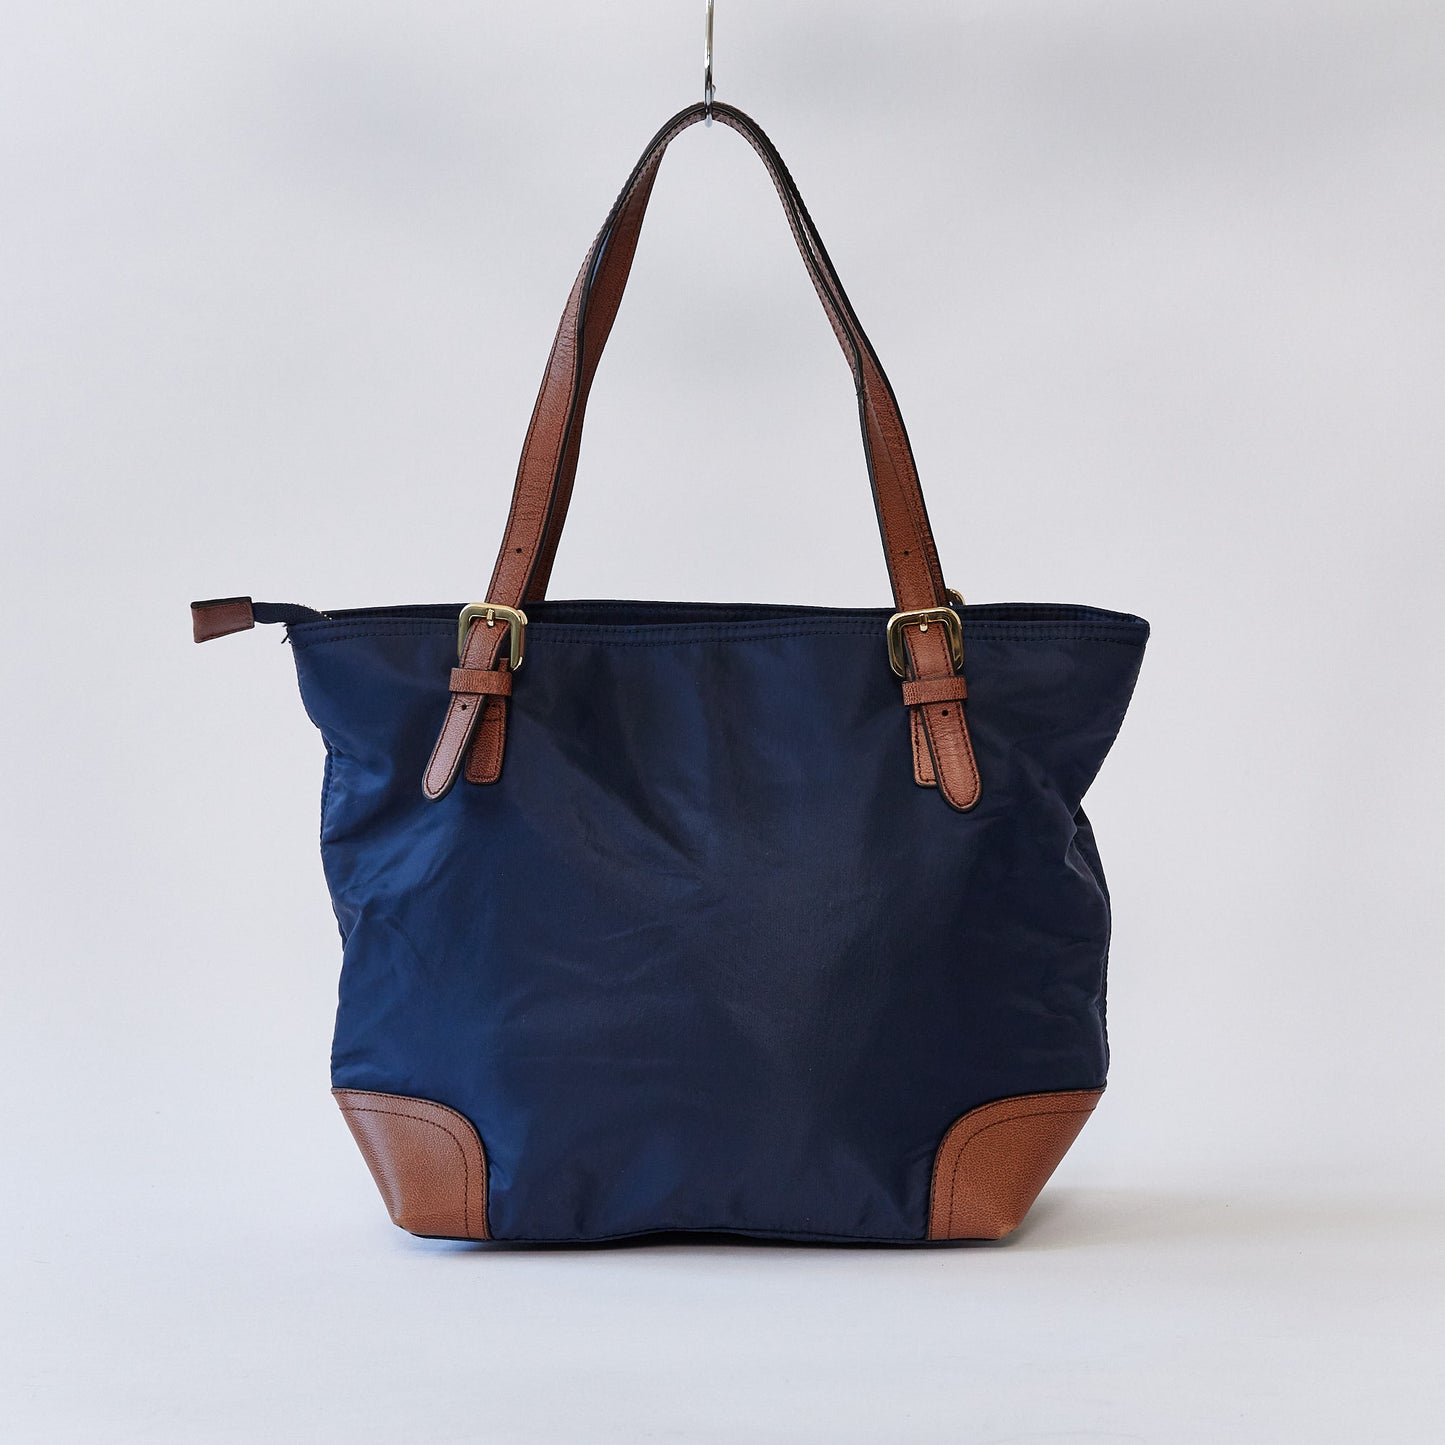 Navy Tote bag with brown handle